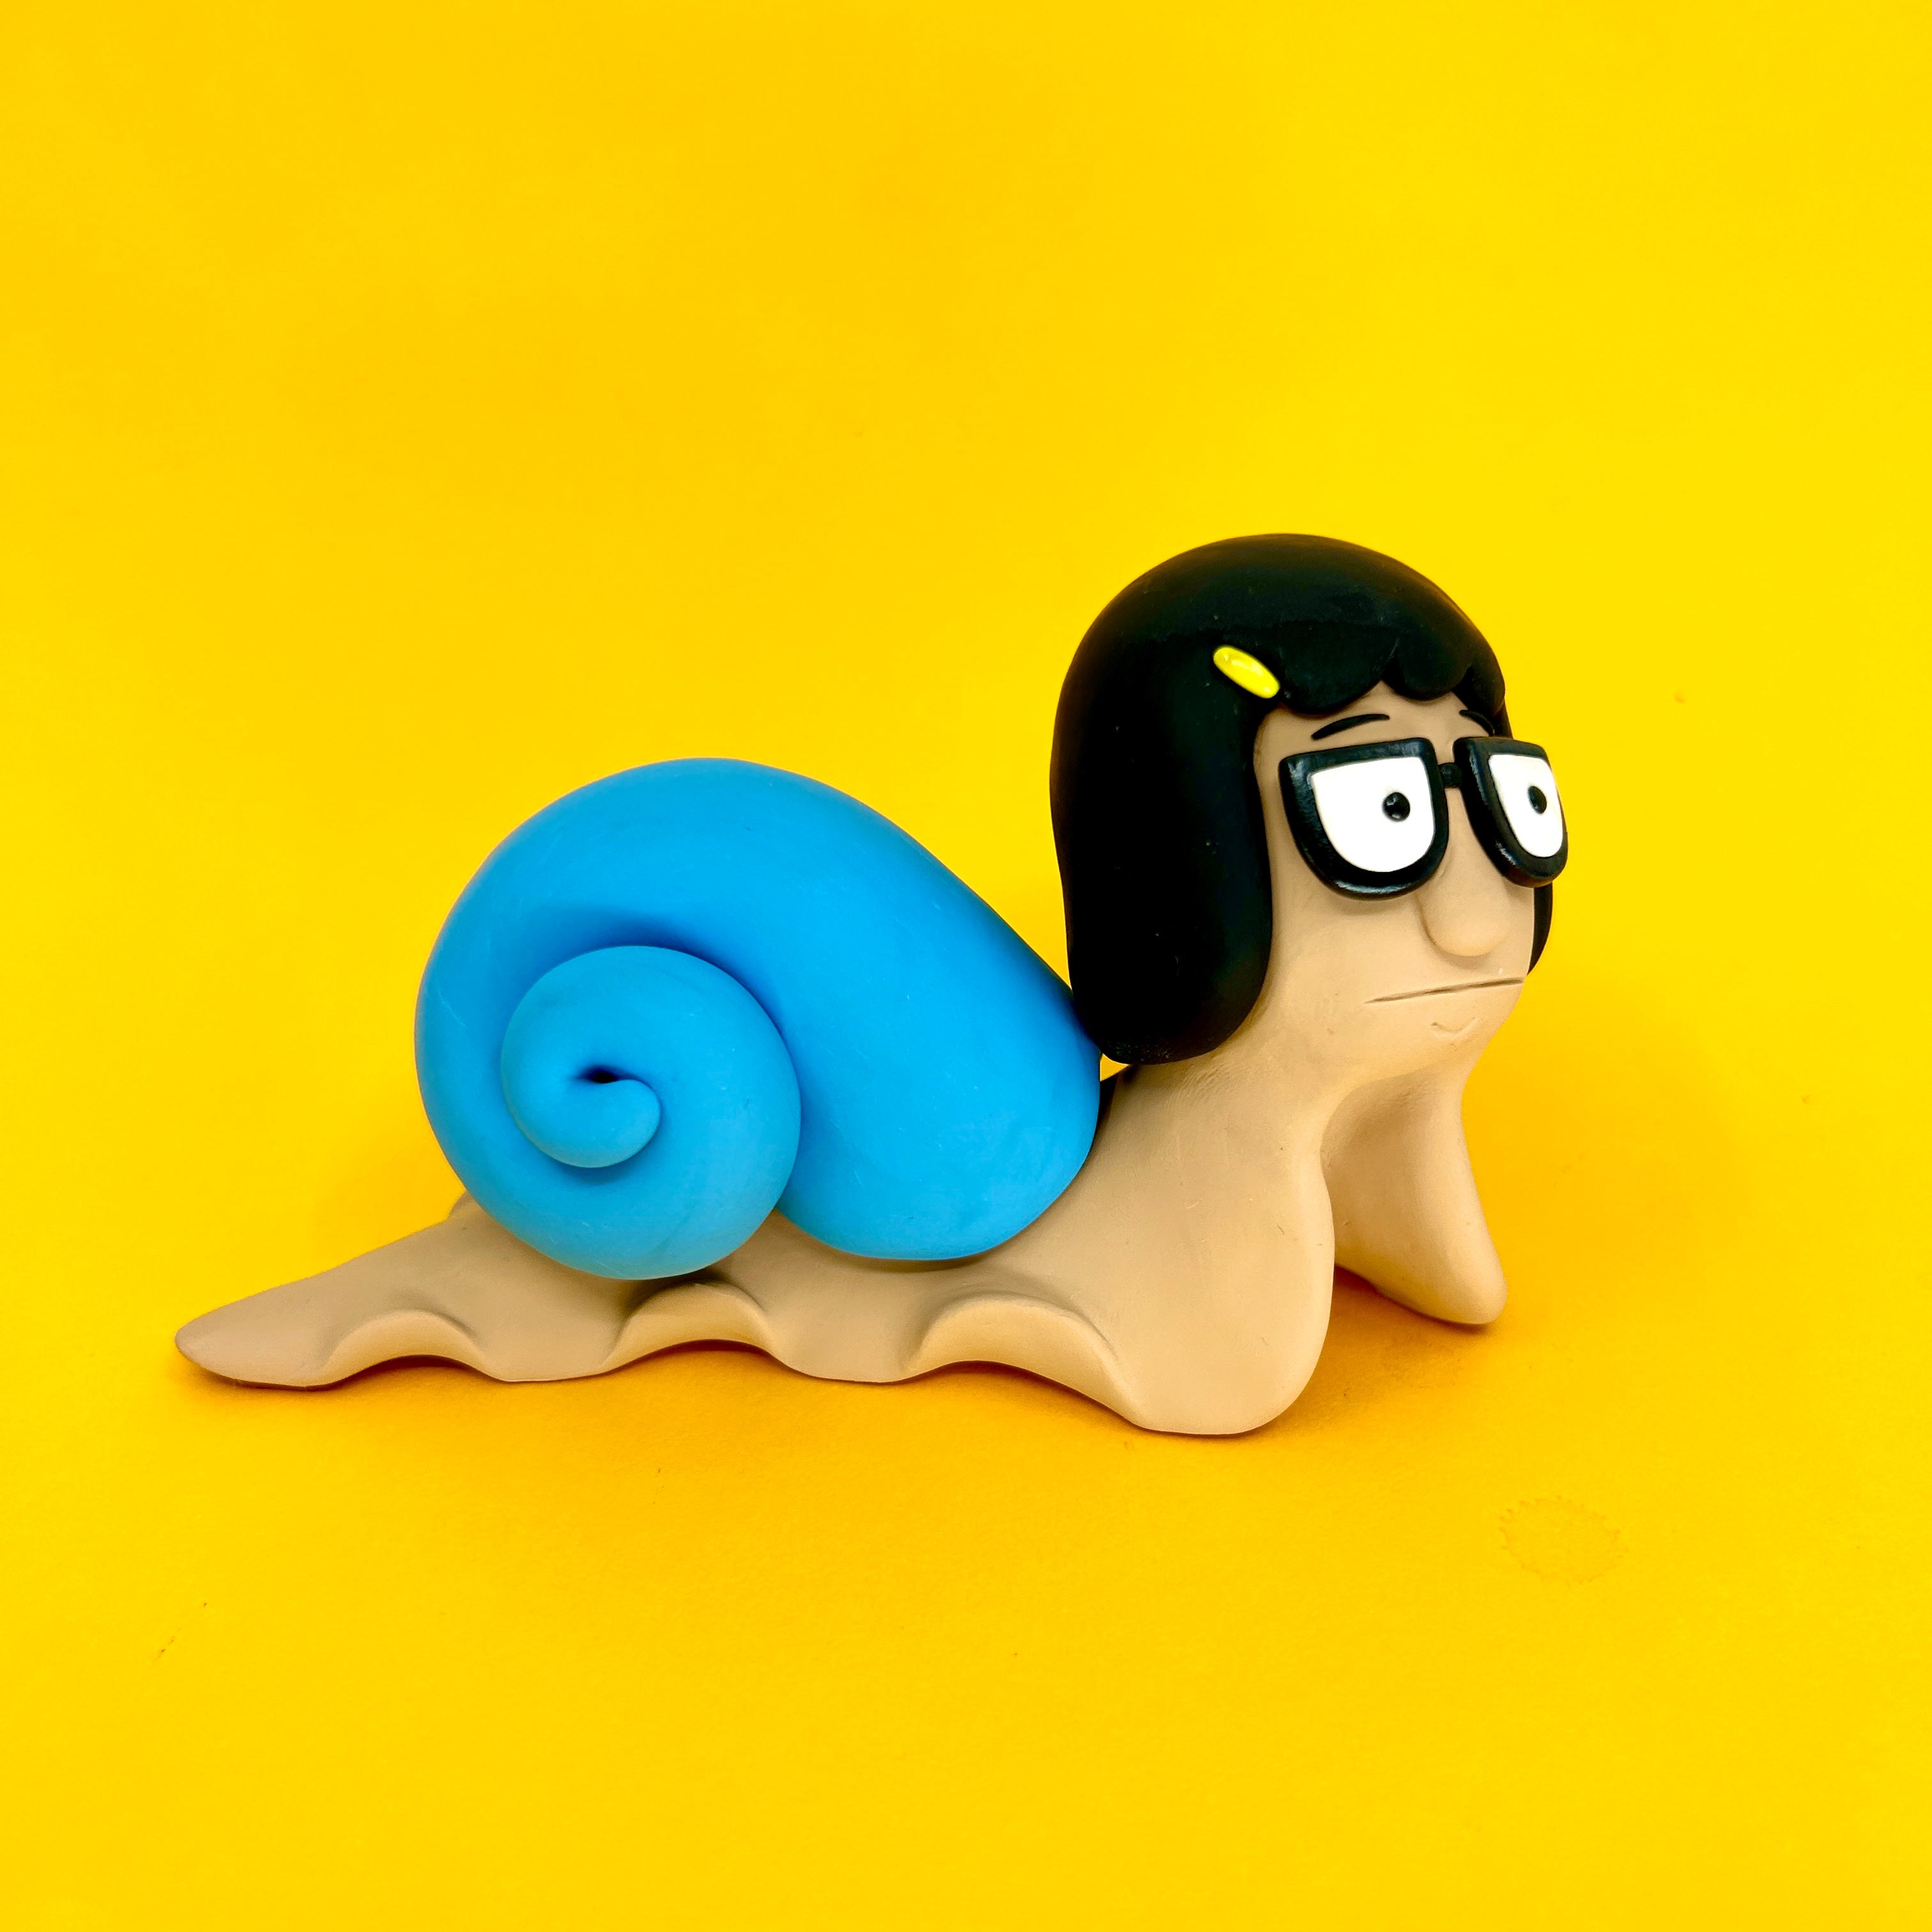 A clay snail with glasses and a blue shell, part of Simon Says Macy & Friends - Tina Snailcher collection.